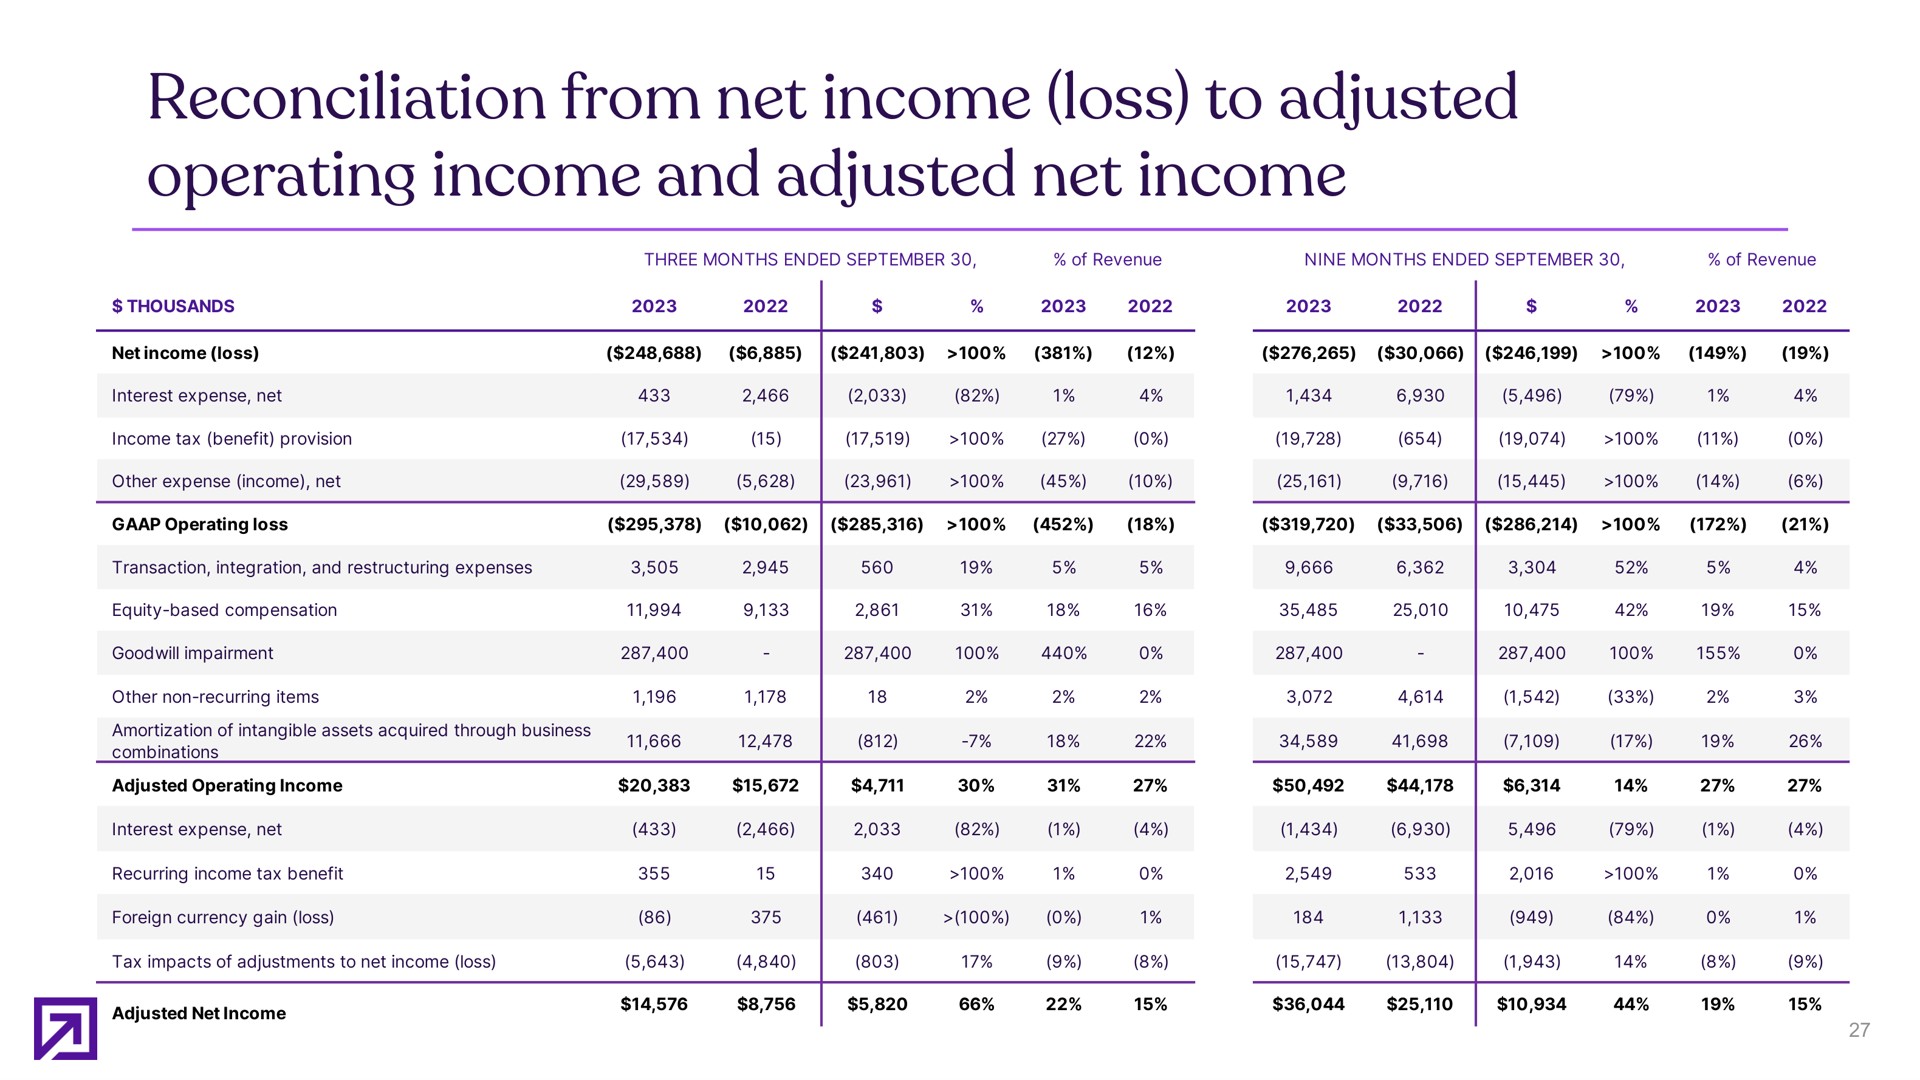 reconciliation from net income loss to adjusted operating income and adjusted net income | Definitive Healthcare